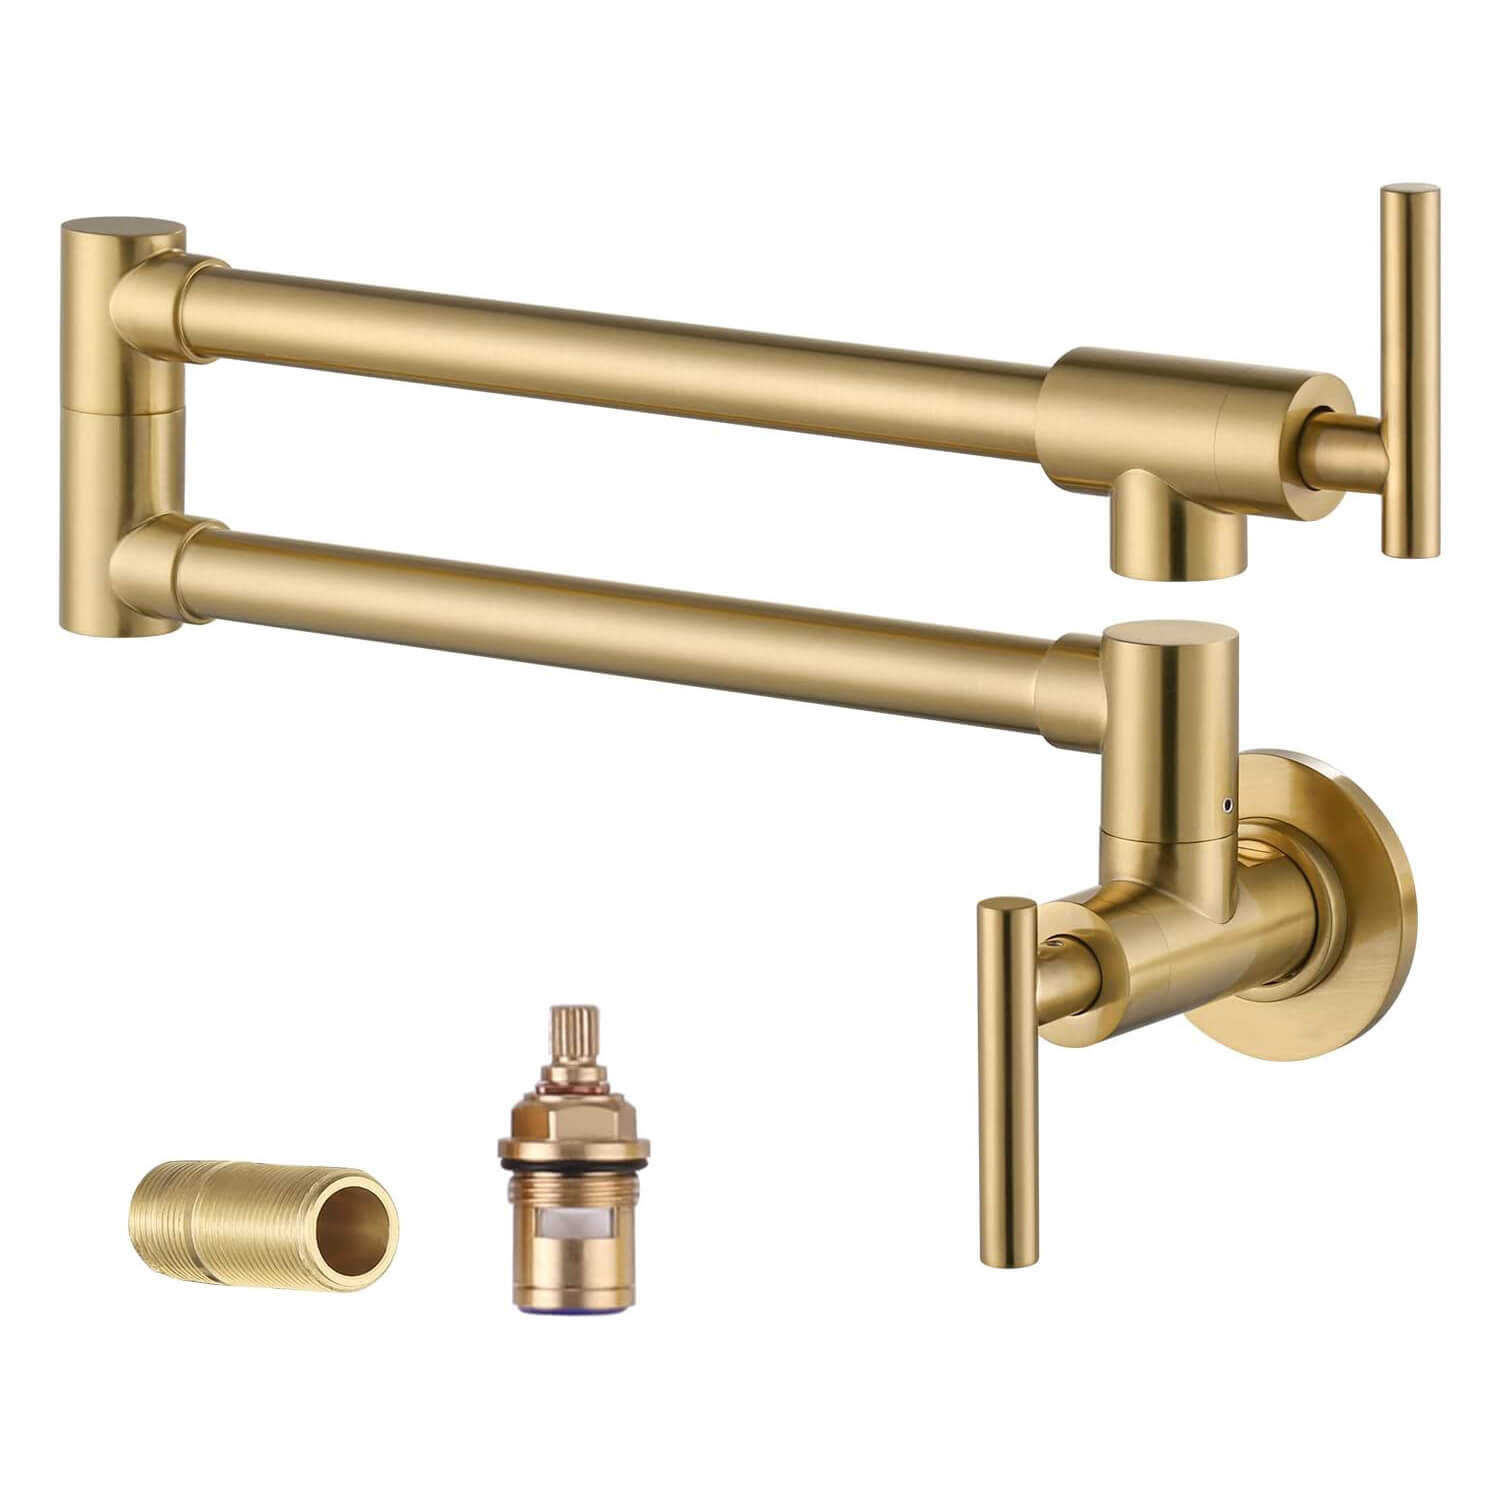 iVIGA Brushed Gold Commercial Wall Mount Pot Filler Faucet Stretchable Double Joint Swing Arm